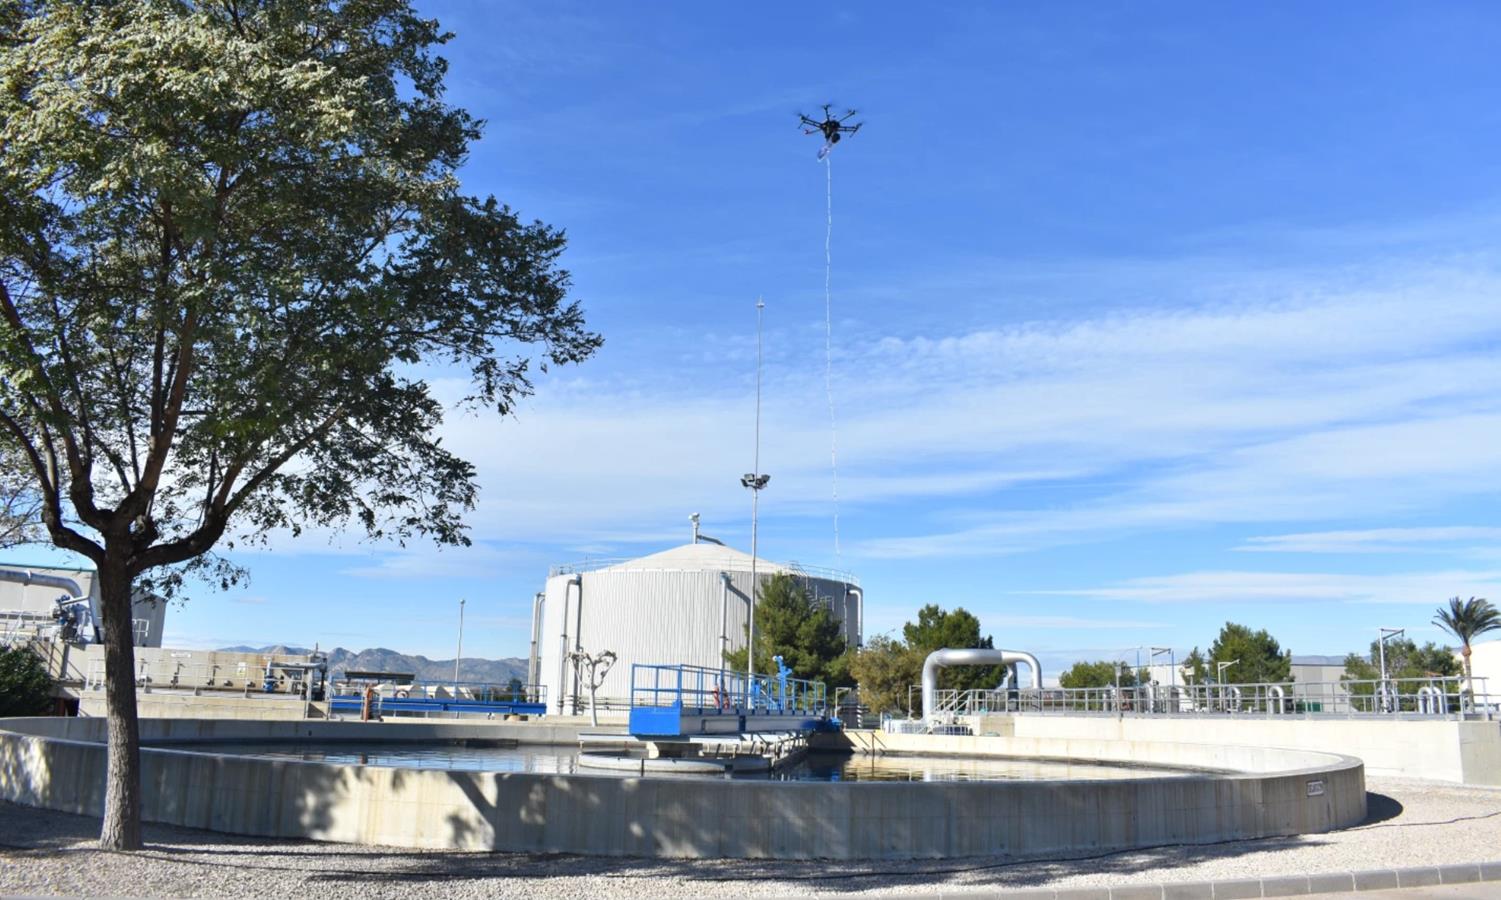 A drone with an electronic nose checked the smell from the sewage treatment plant